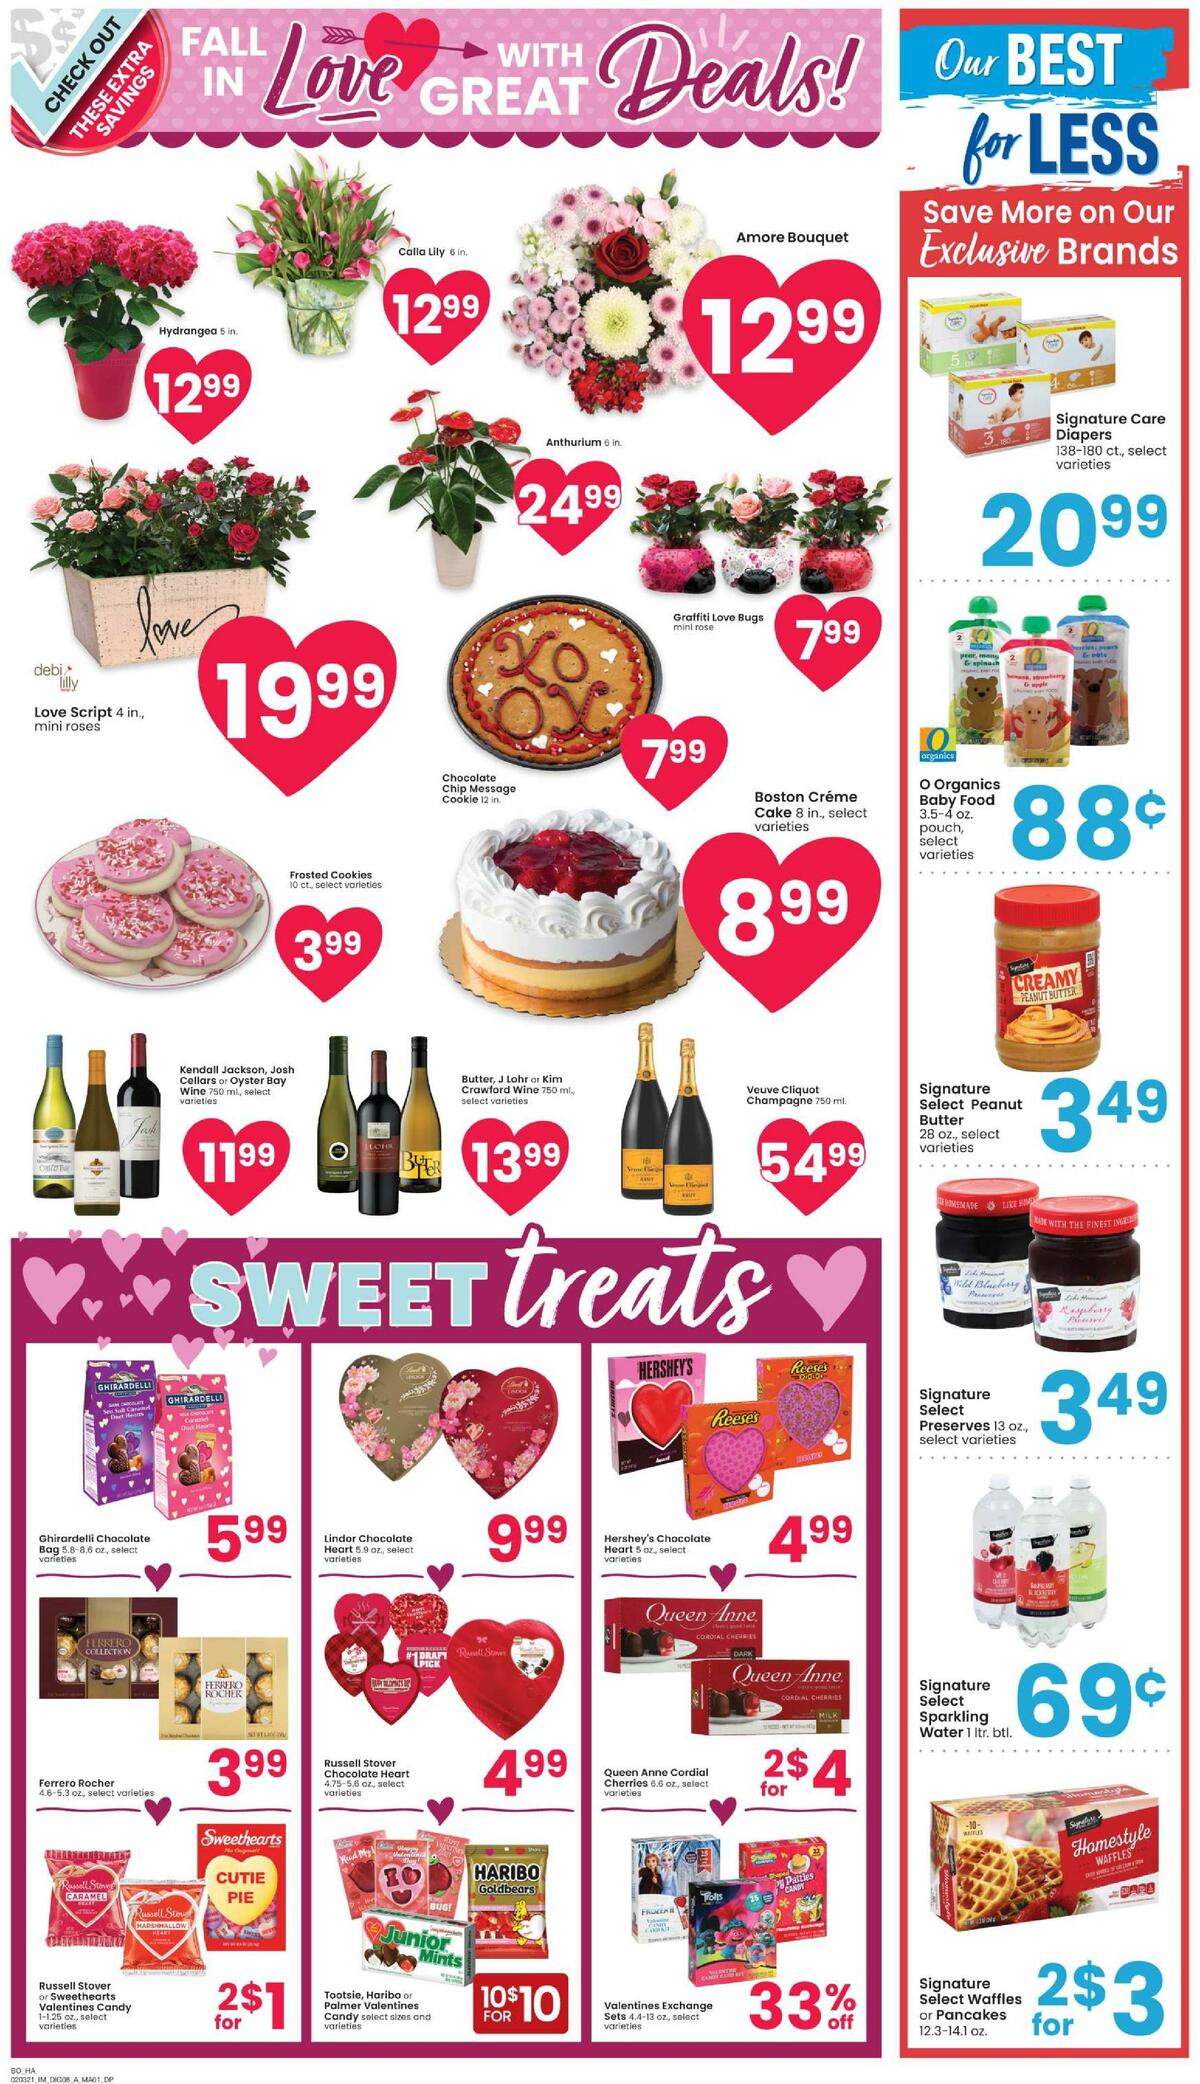 Albertsons Weekly Ad from February 3